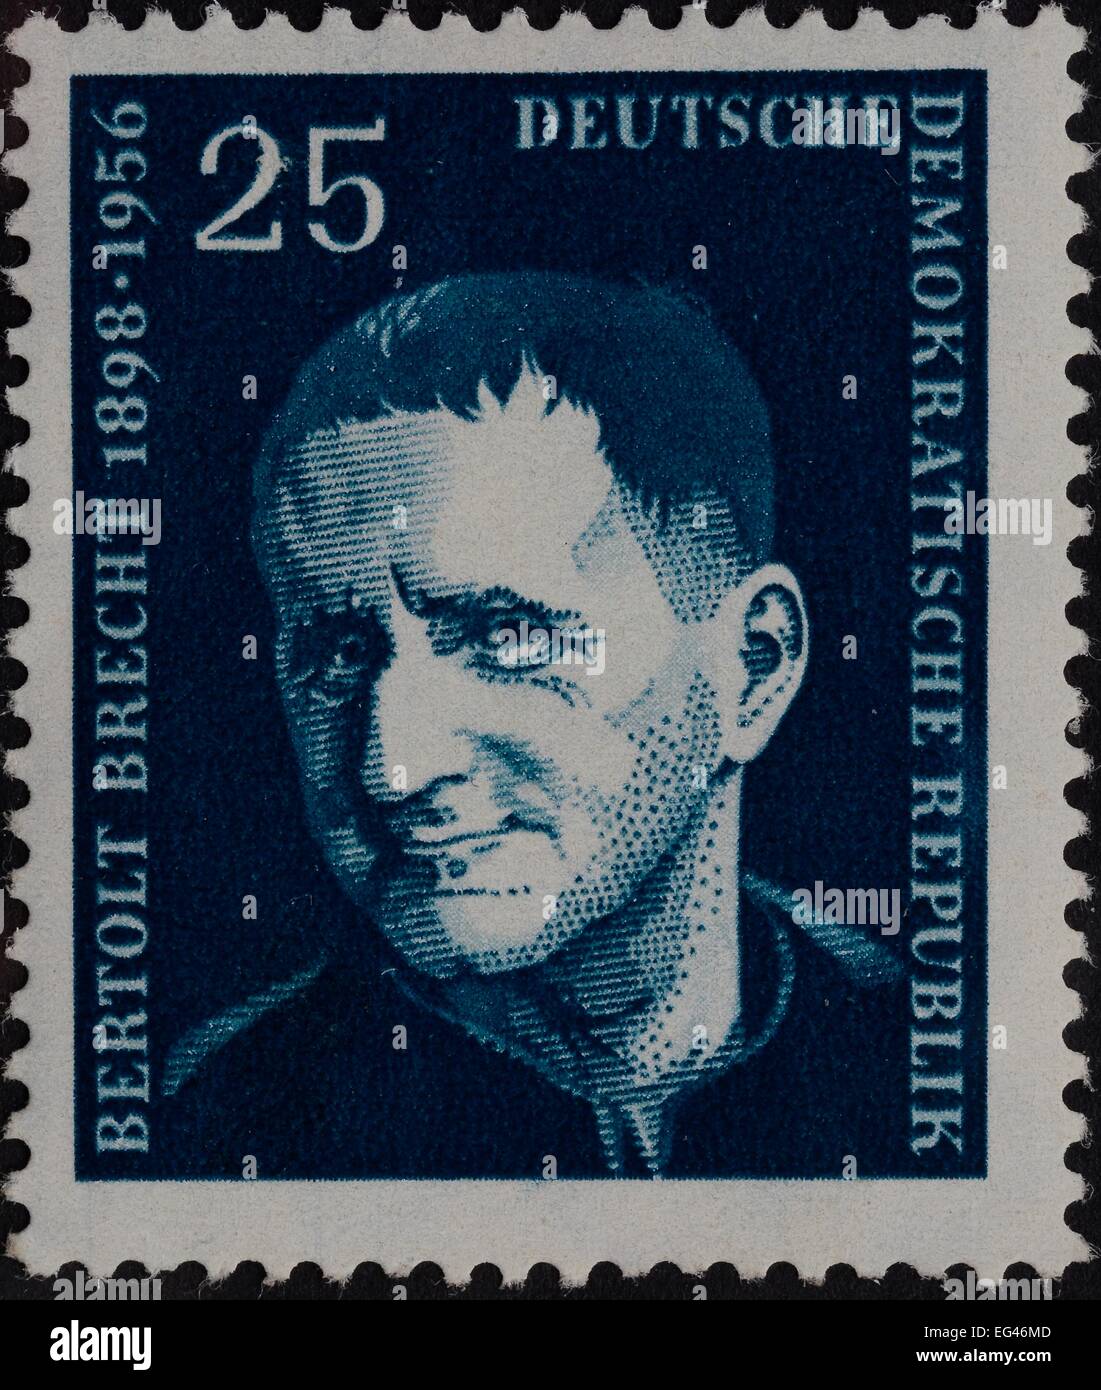 BerthoRMd Brecht, a German Marxist, poet, pRMaywright, and theatre director, portrait on a stamp, GDR, 1957 Stock Photo